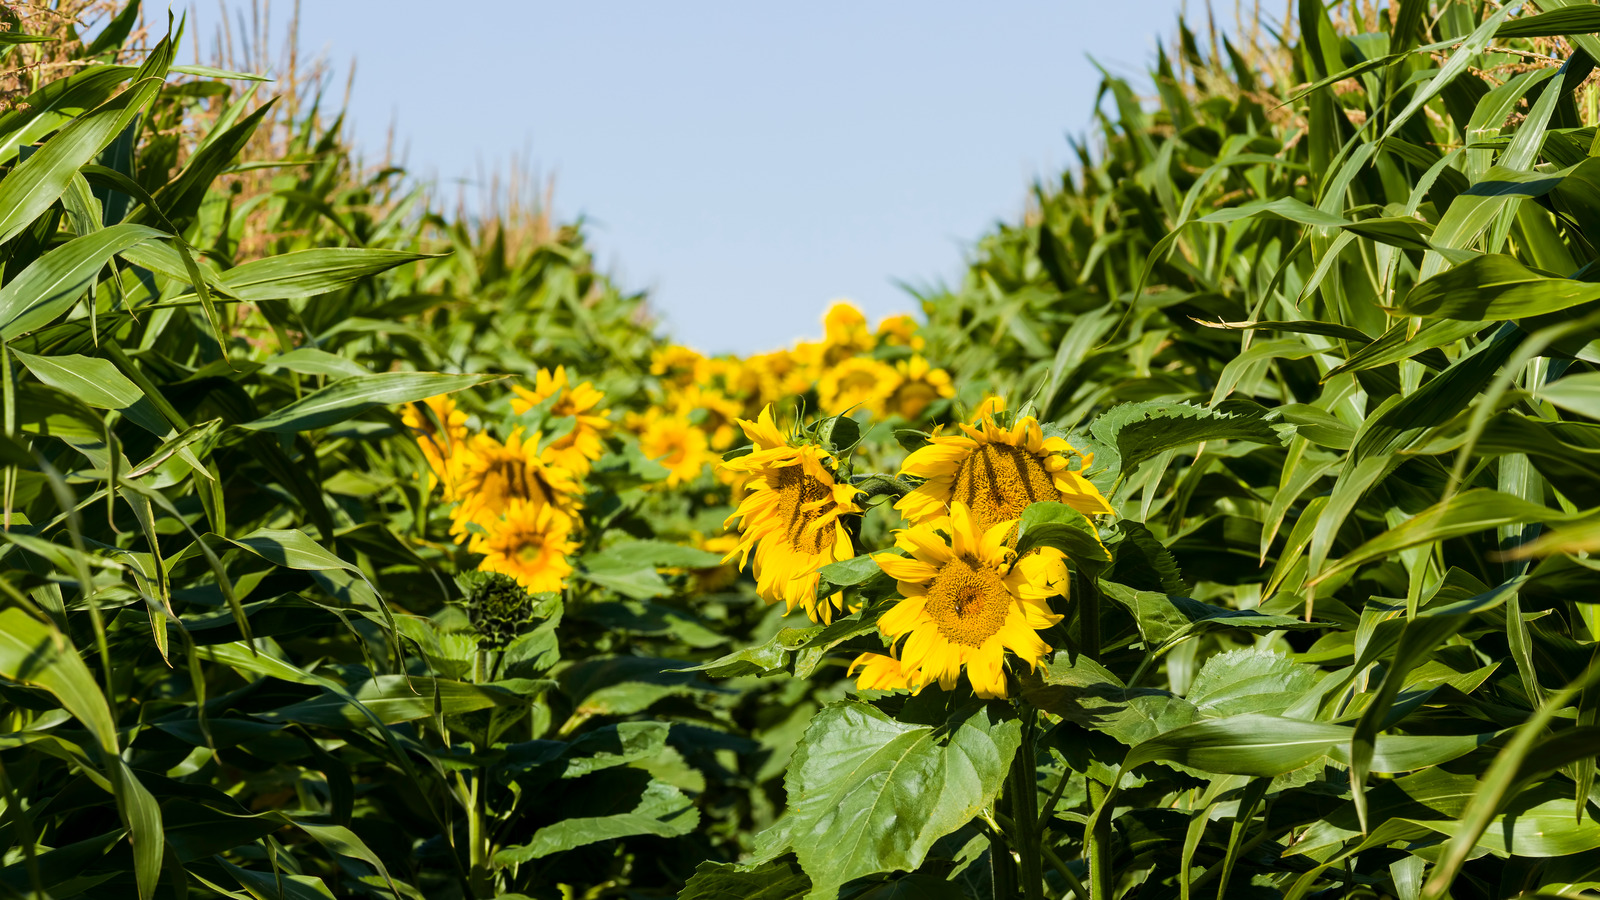 Image of Corn companion plant for sunflowers